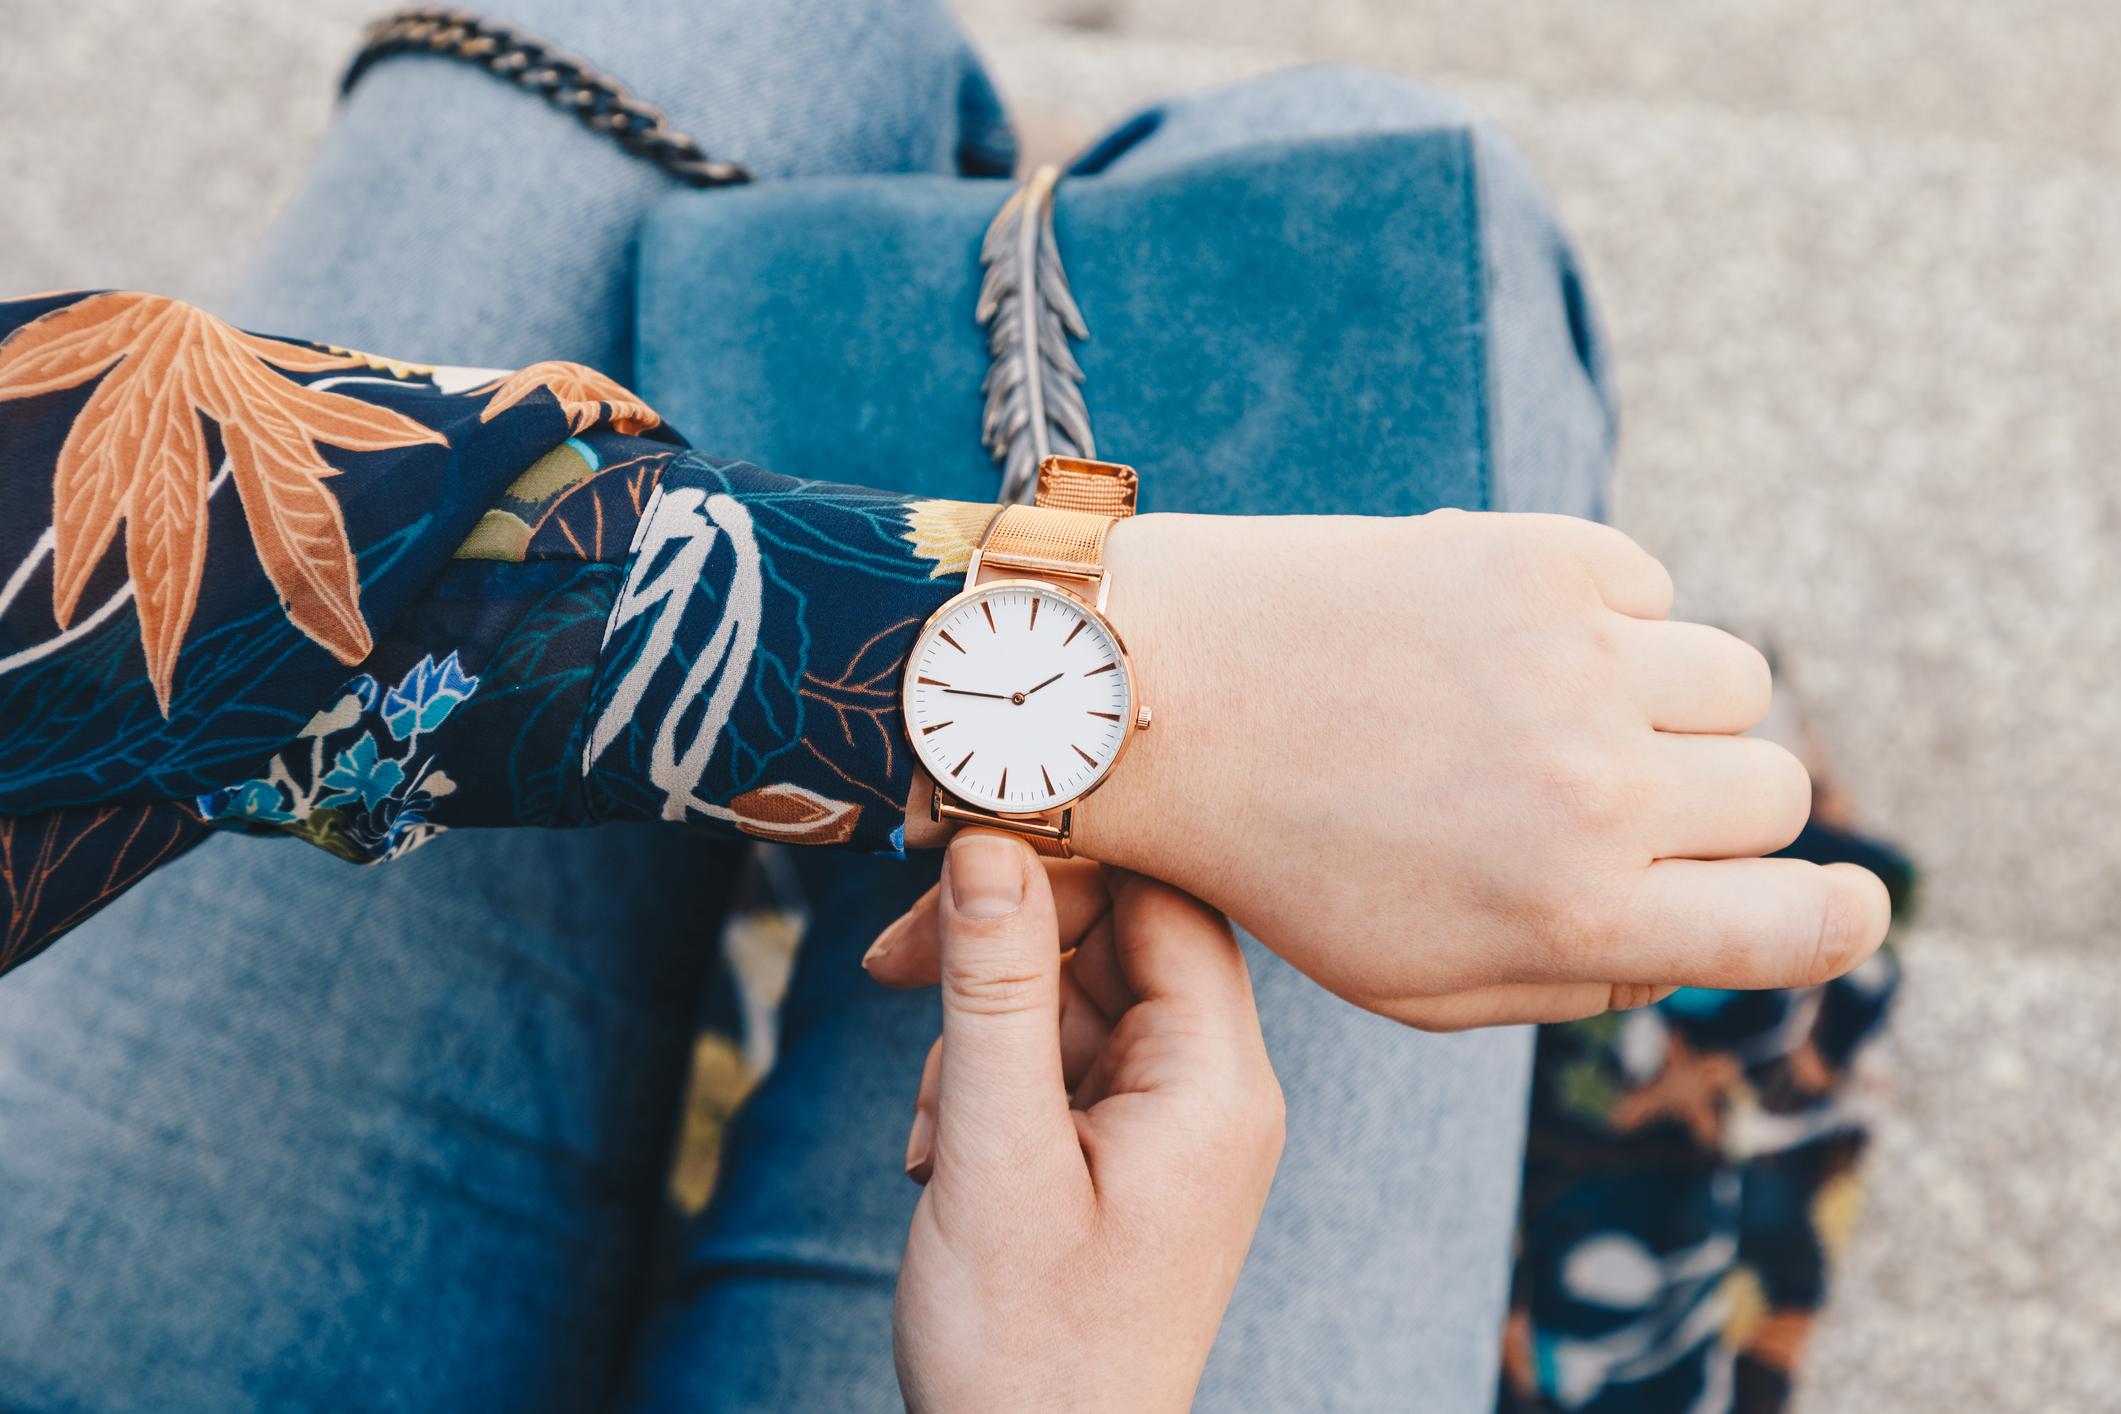 10 best watches for women | The 